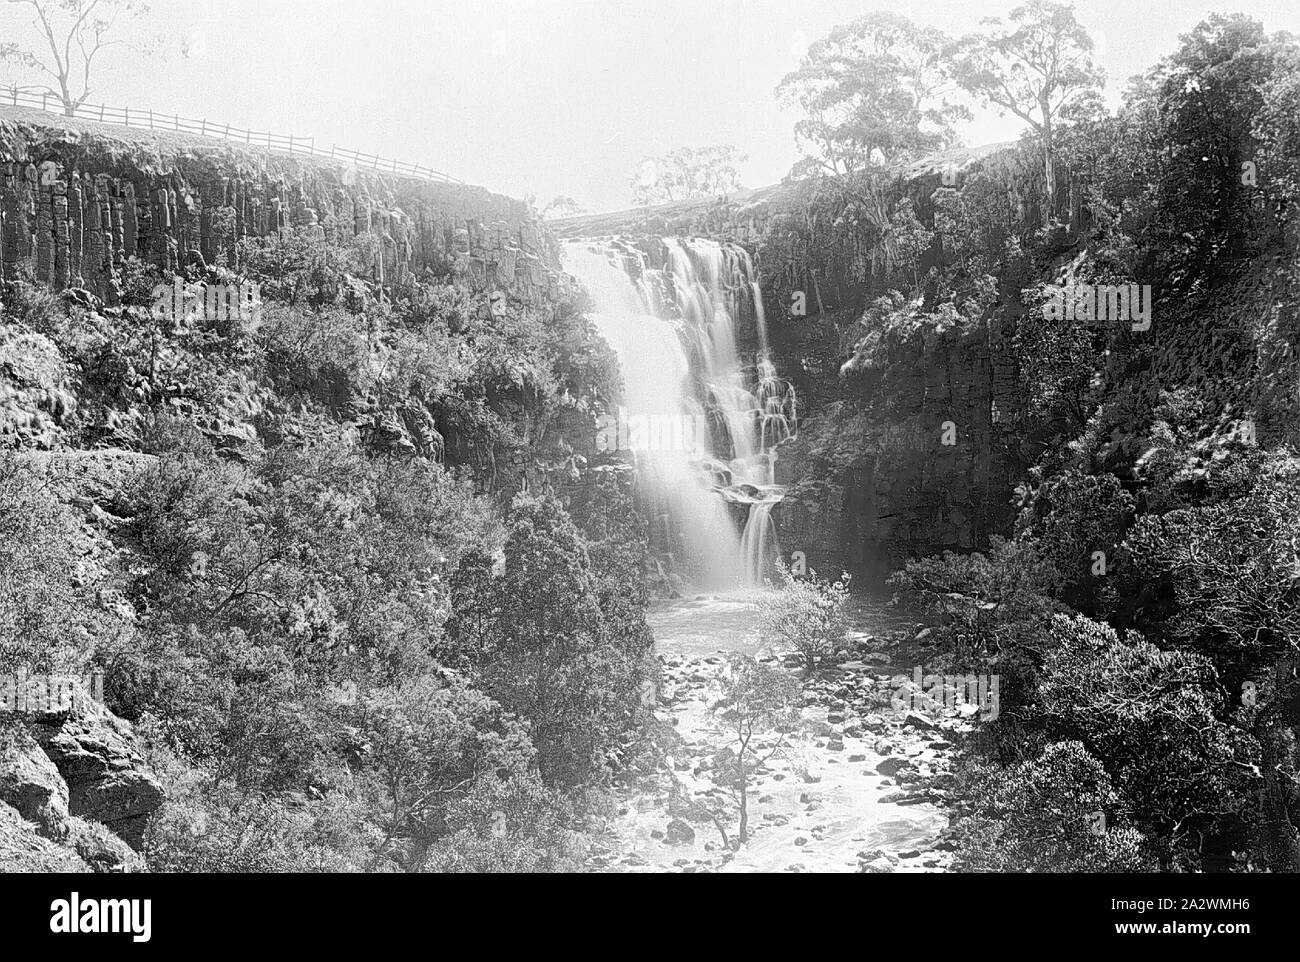 Negative - Lal Lal Falls, Victoria, 30 Sep 1896, Waterfall on Lal Lal Creek Stock Photo